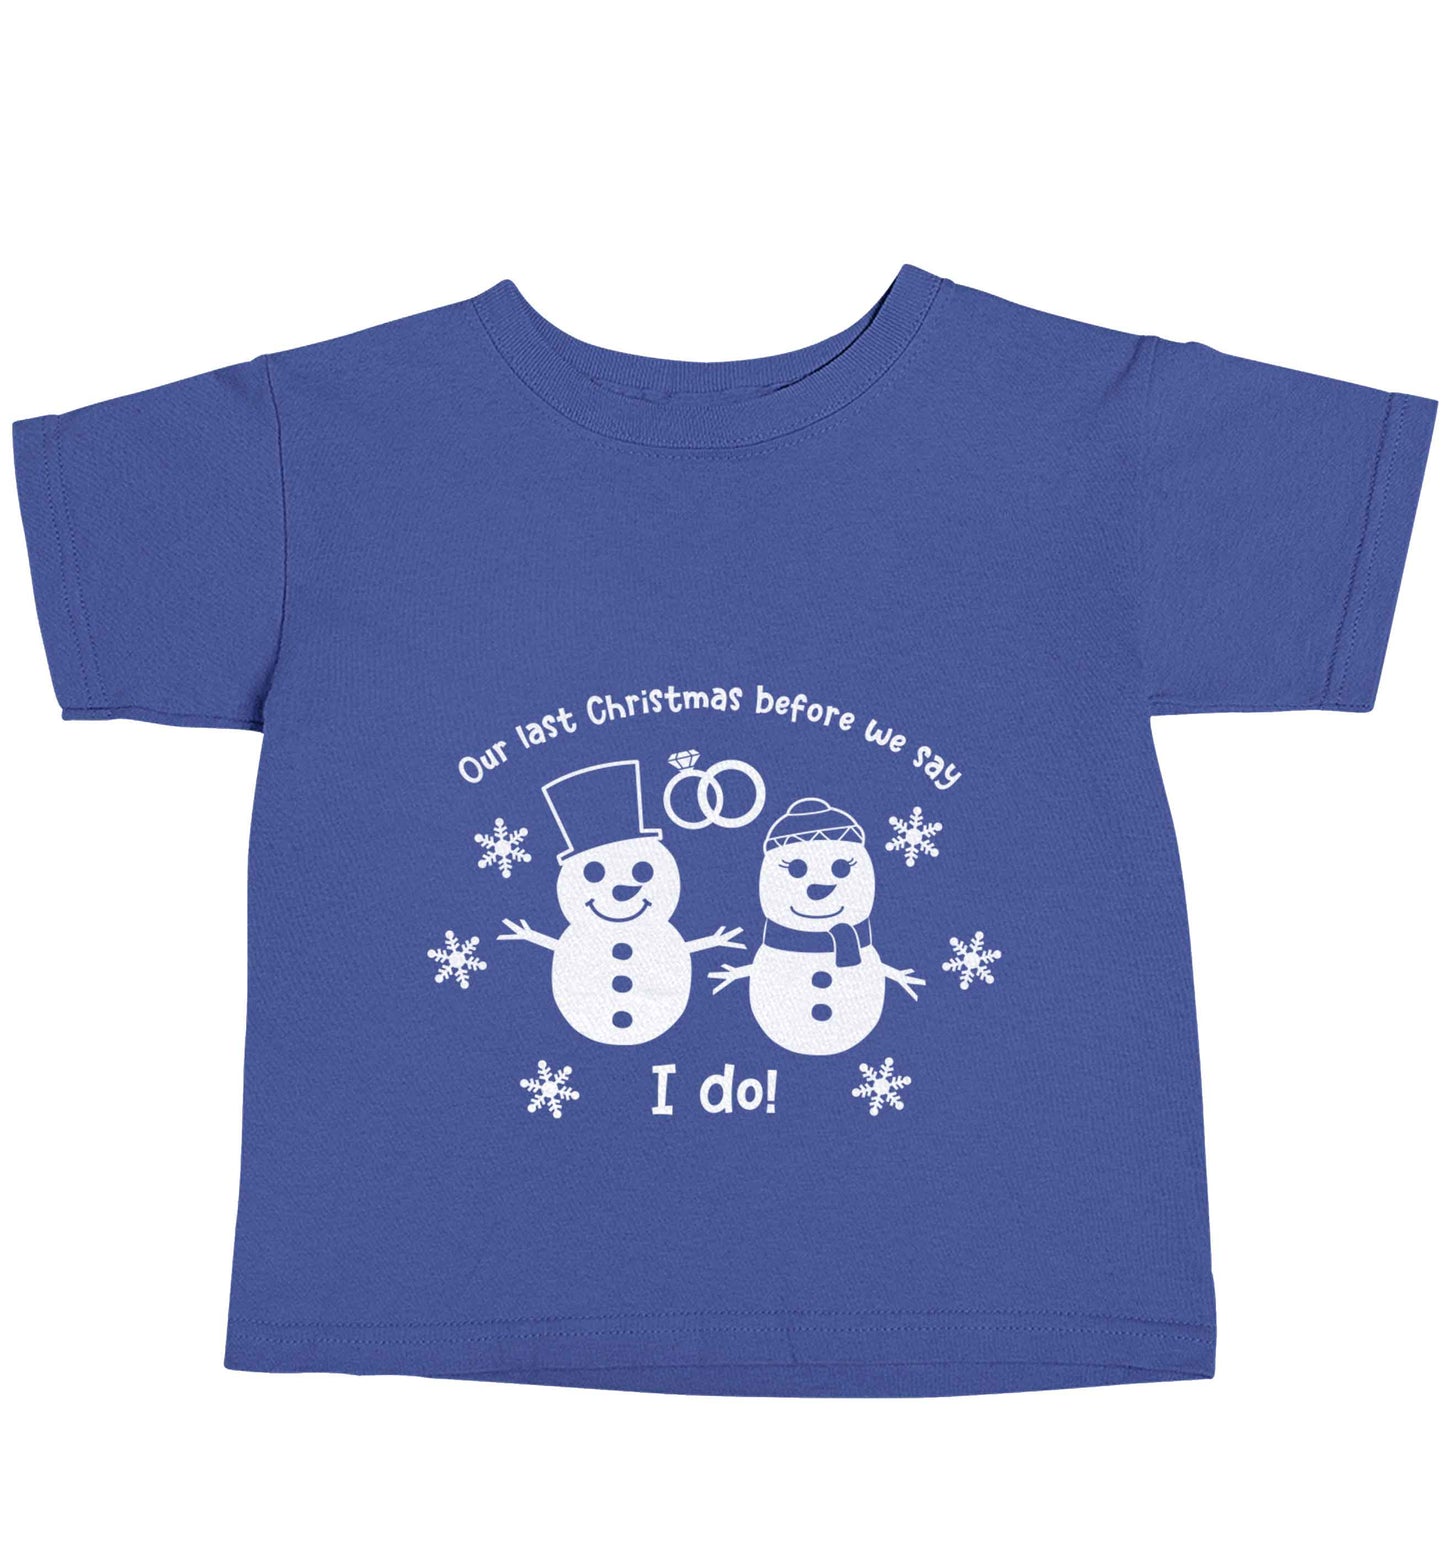 Last Christmas before we say I do blue baby toddler Tshirt 2 Years